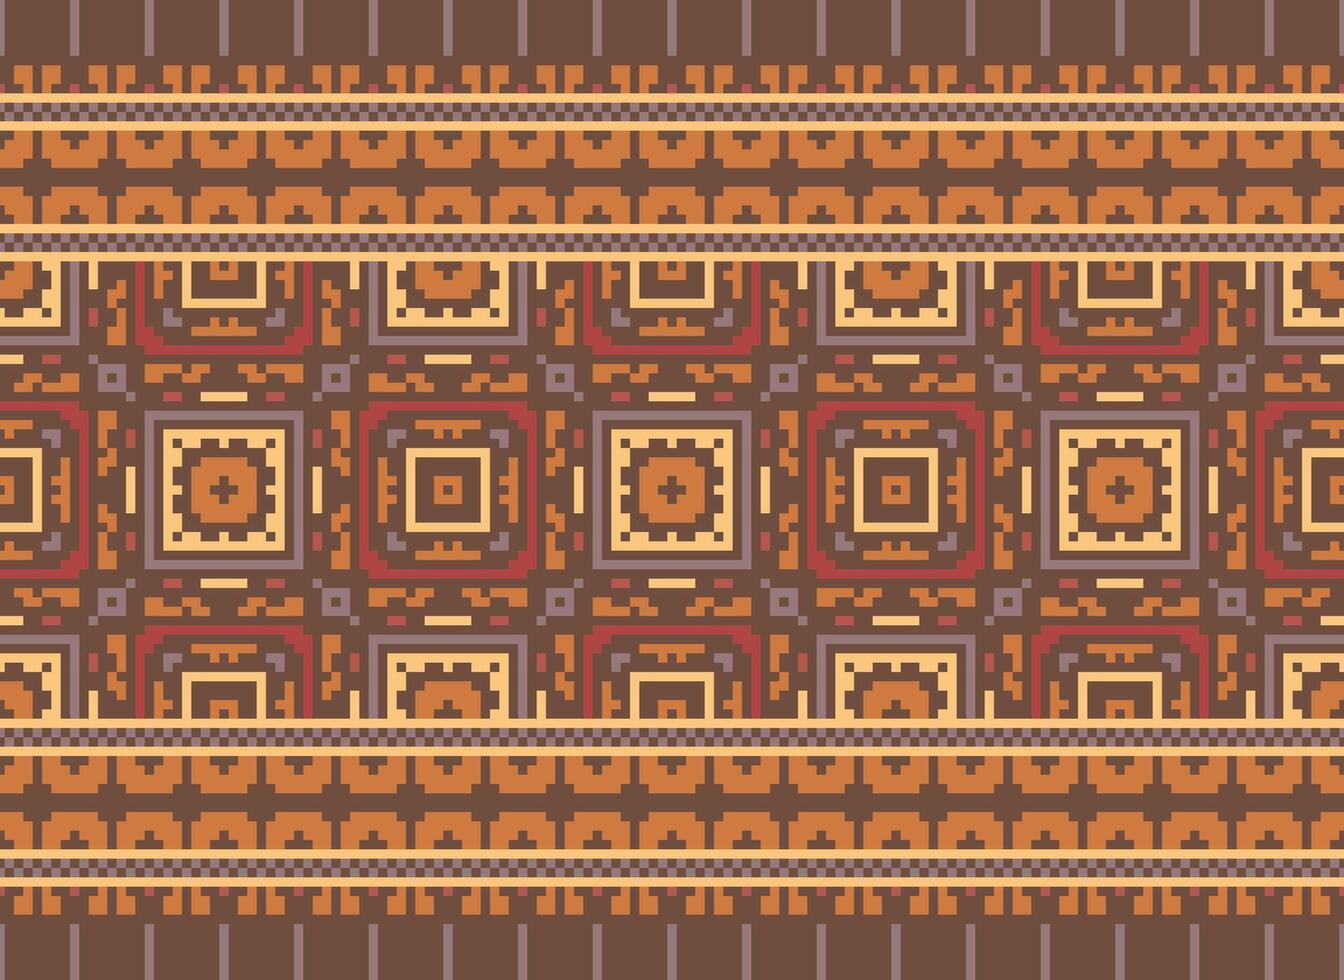 Pixel ikat and cross stitch geometric seamless pattern ethnic oriental traditional. Aztec style illustration design for carpet, wallpaper, clothing, wrapping, batik. vector